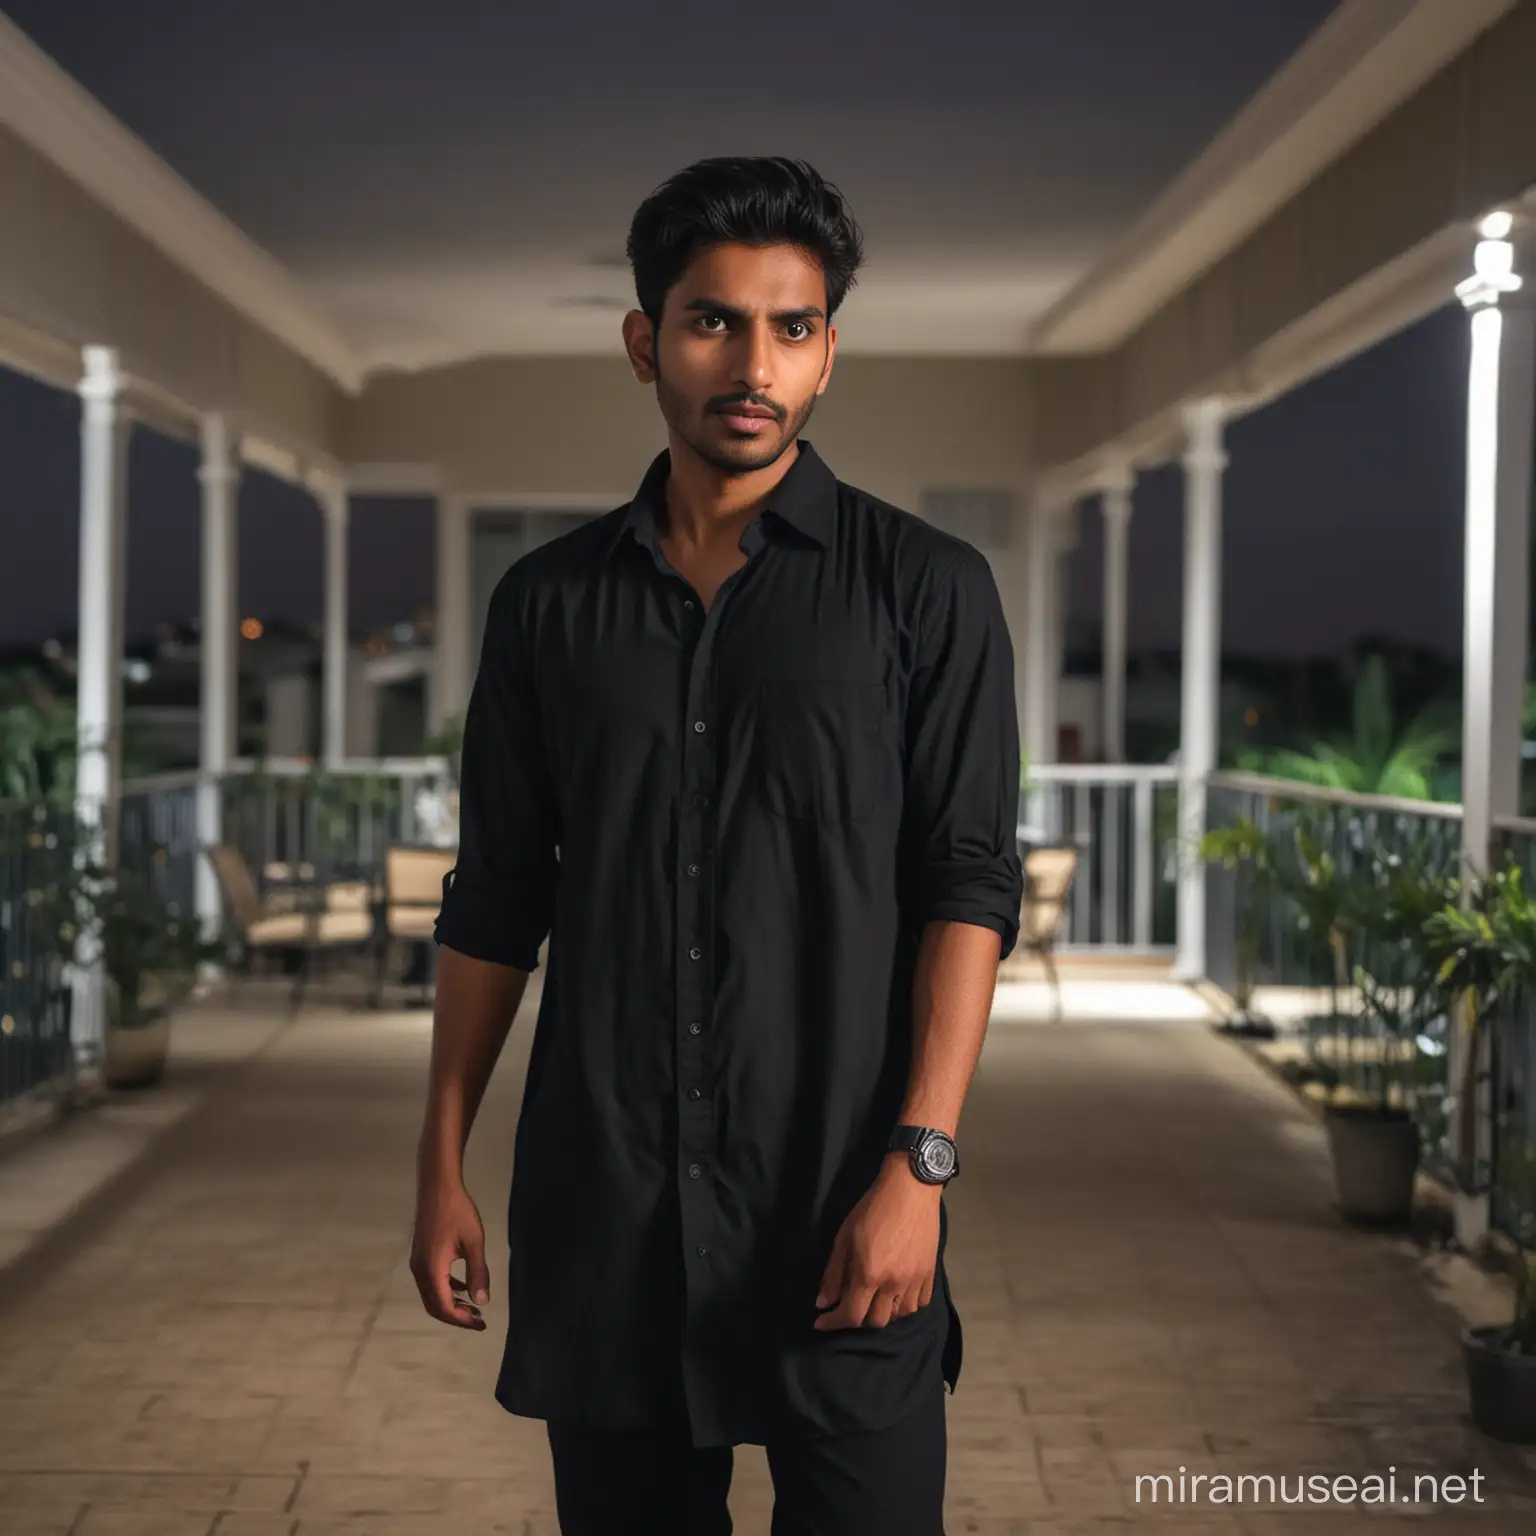 Young Indian Man in Black Shirt Standing on Bungalow Terrace at Midnight with Shocked Expression